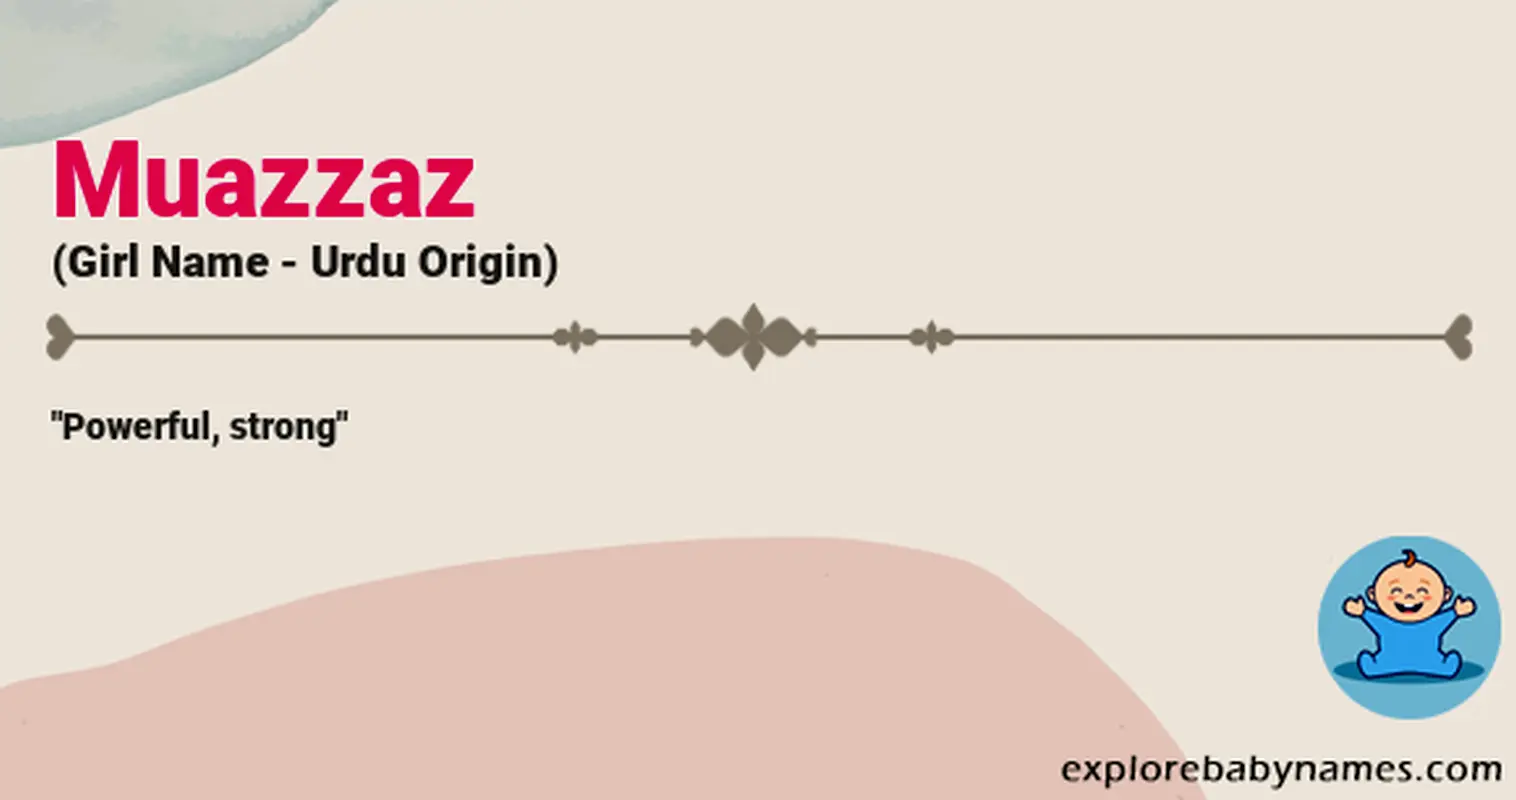 Meaning of Muazzaz